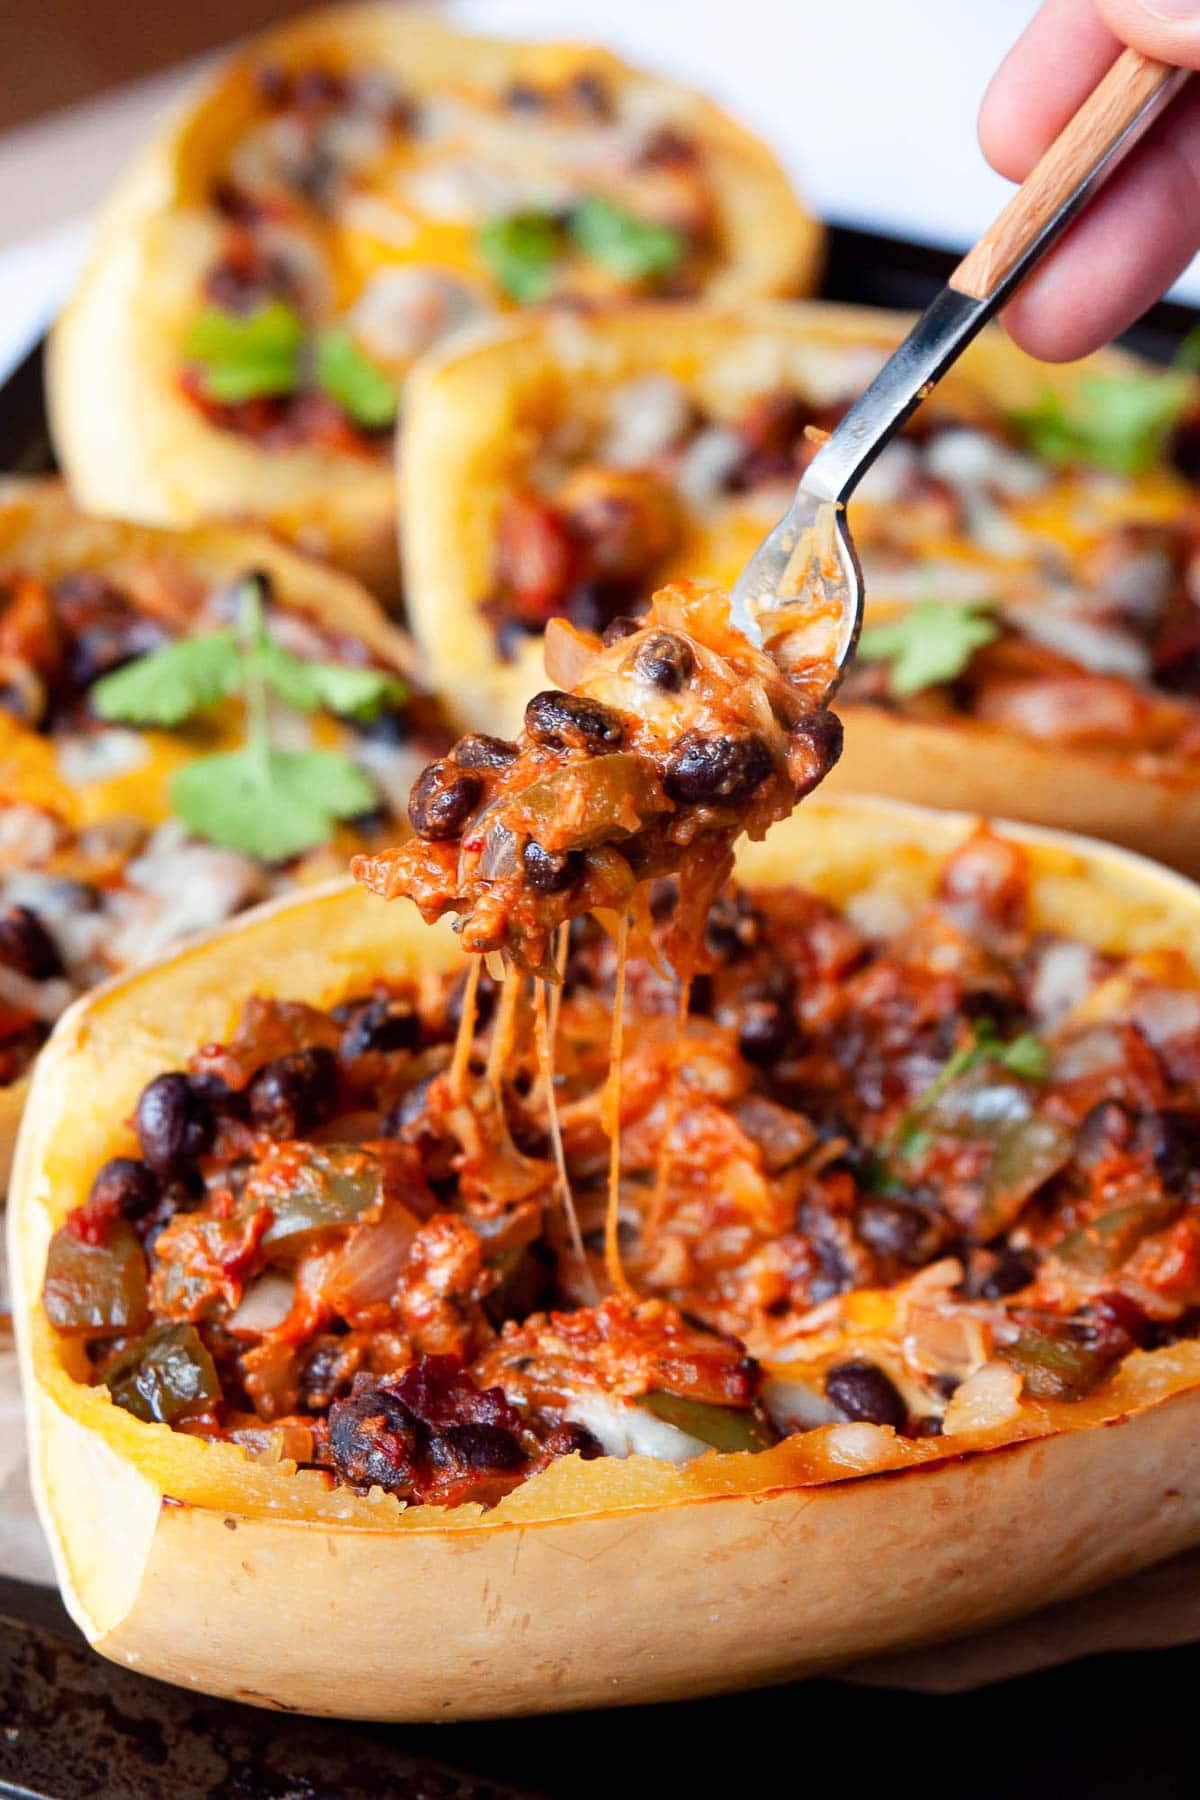 Stuffed spaghetti squash with beans, cheese and sauce on a fork above the squash halves.